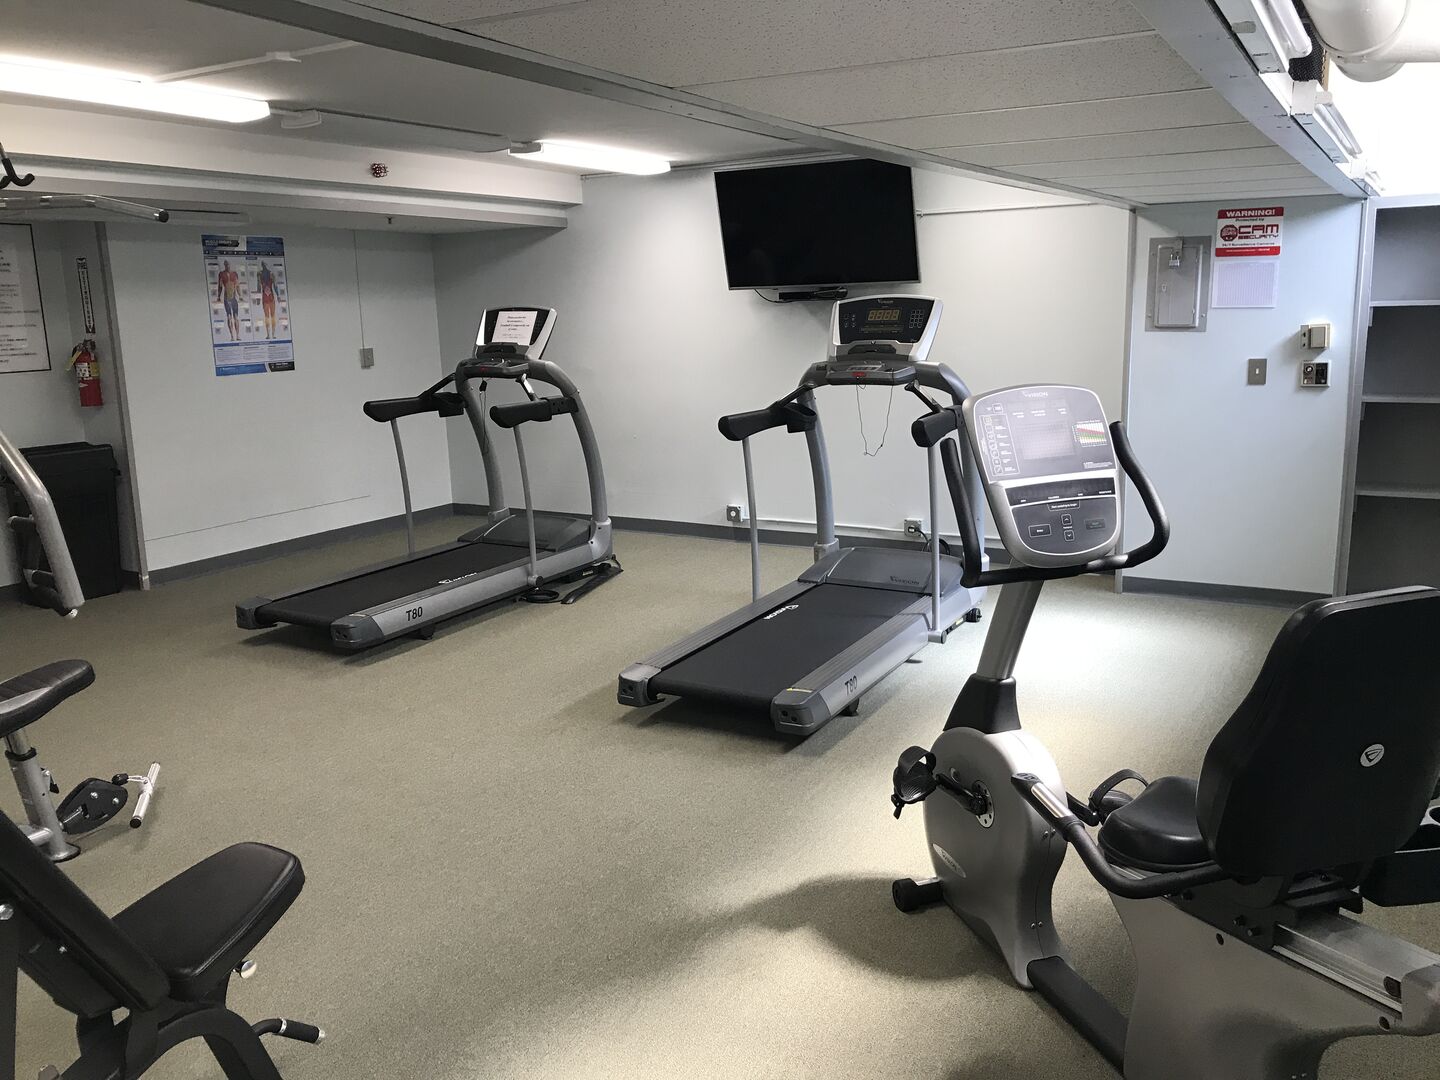 Fitness center in building